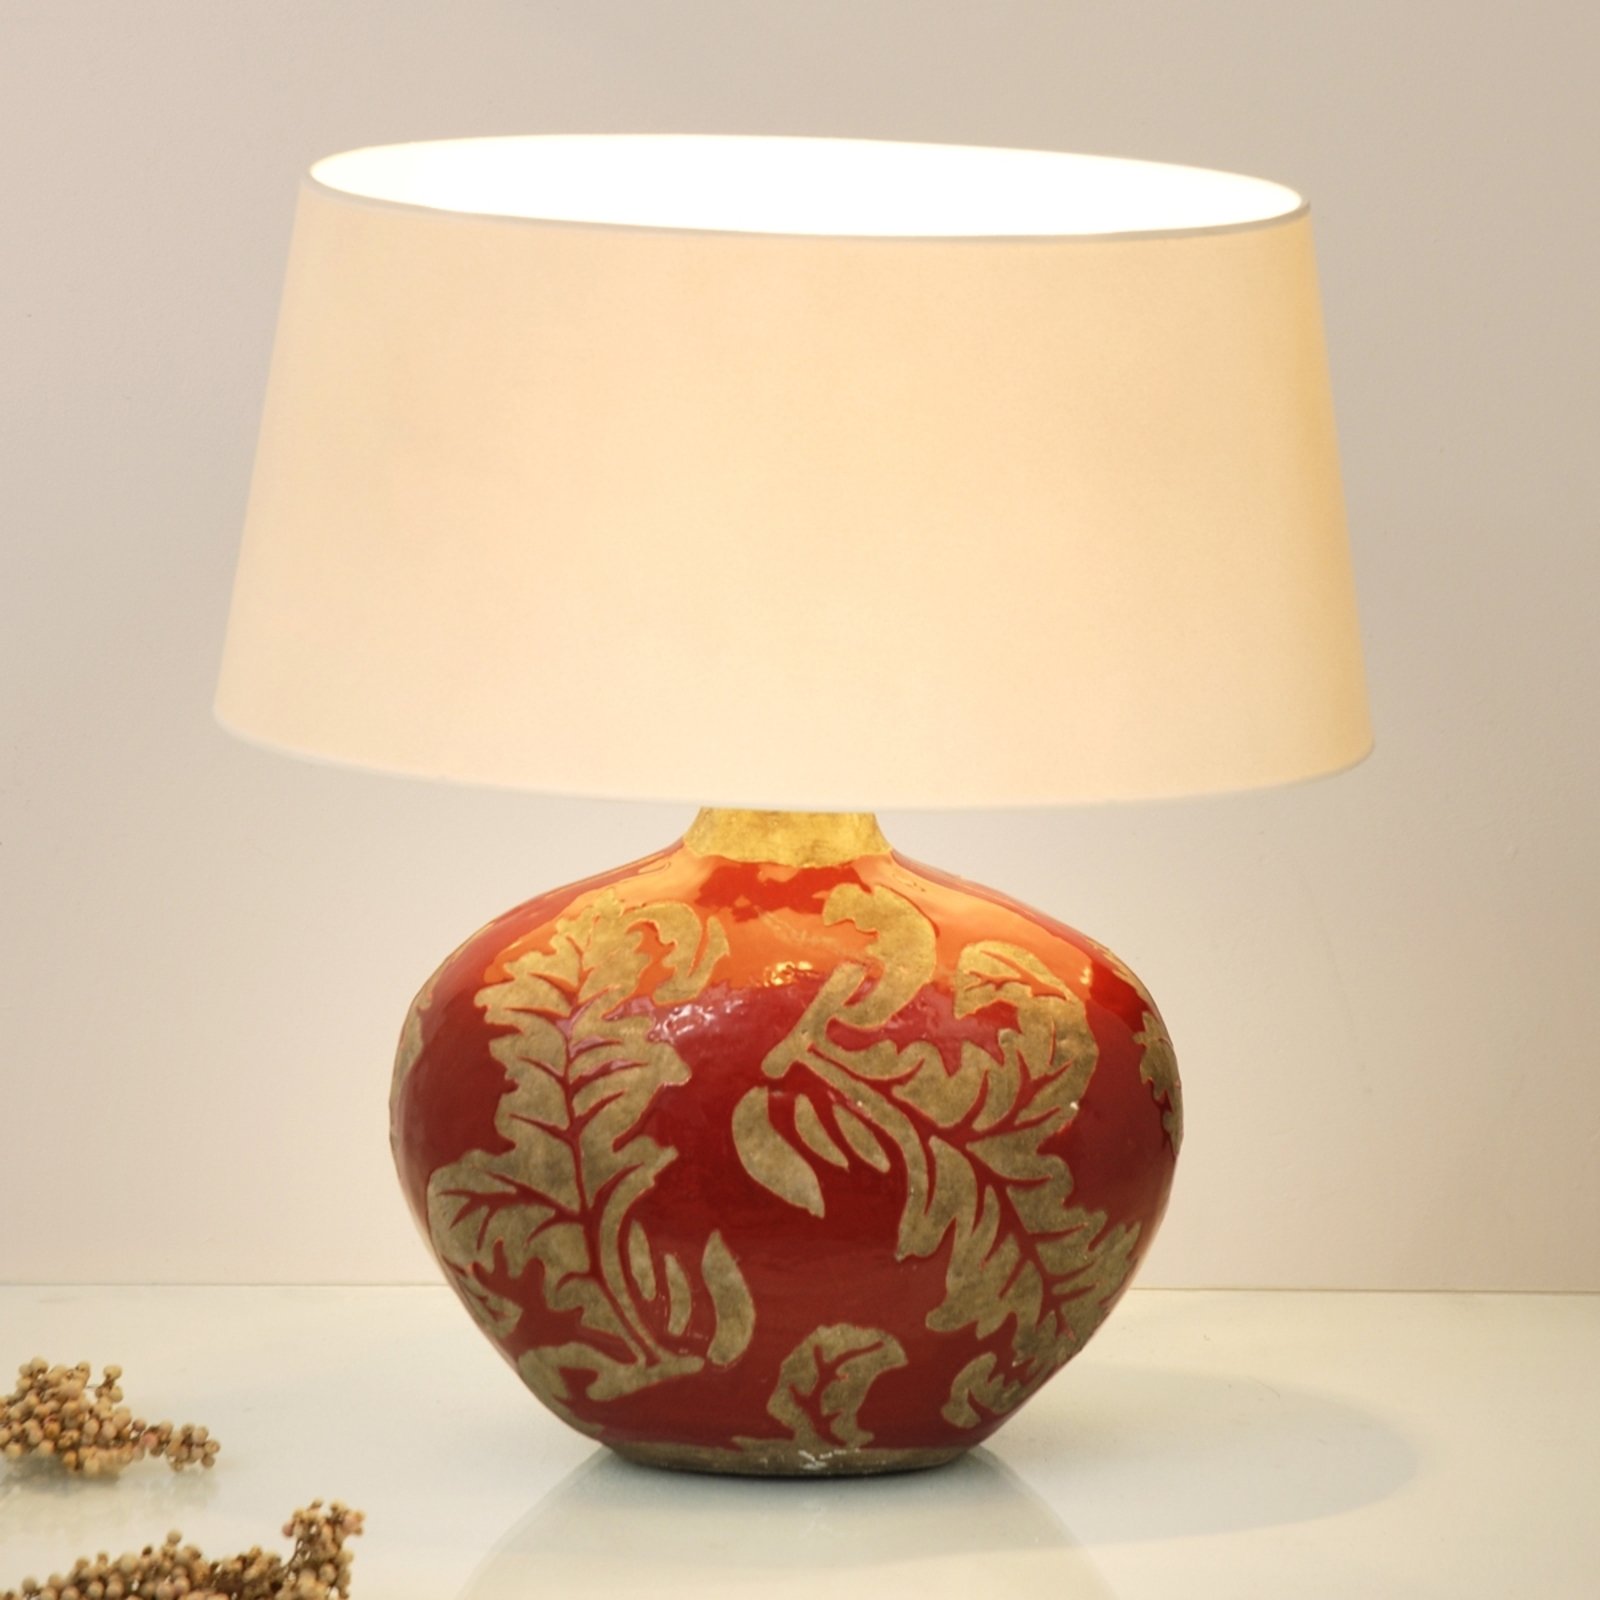 Toulouse oval table lamp, 43 cm high, red